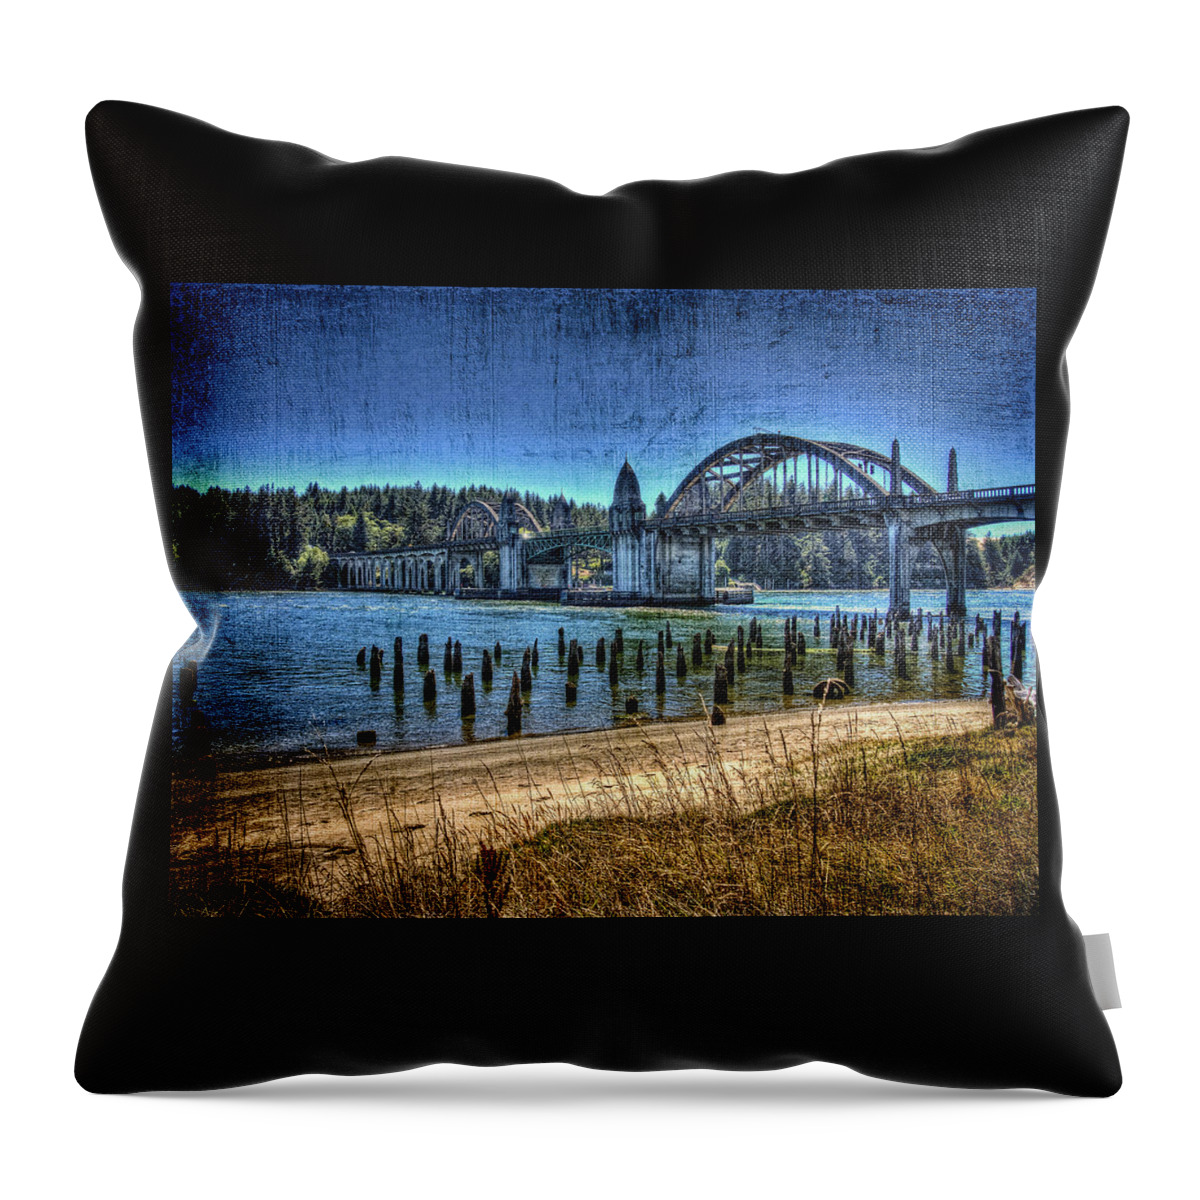 Hdr Throw Pillow featuring the photograph Siuslaw River by Thom Zehrfeld